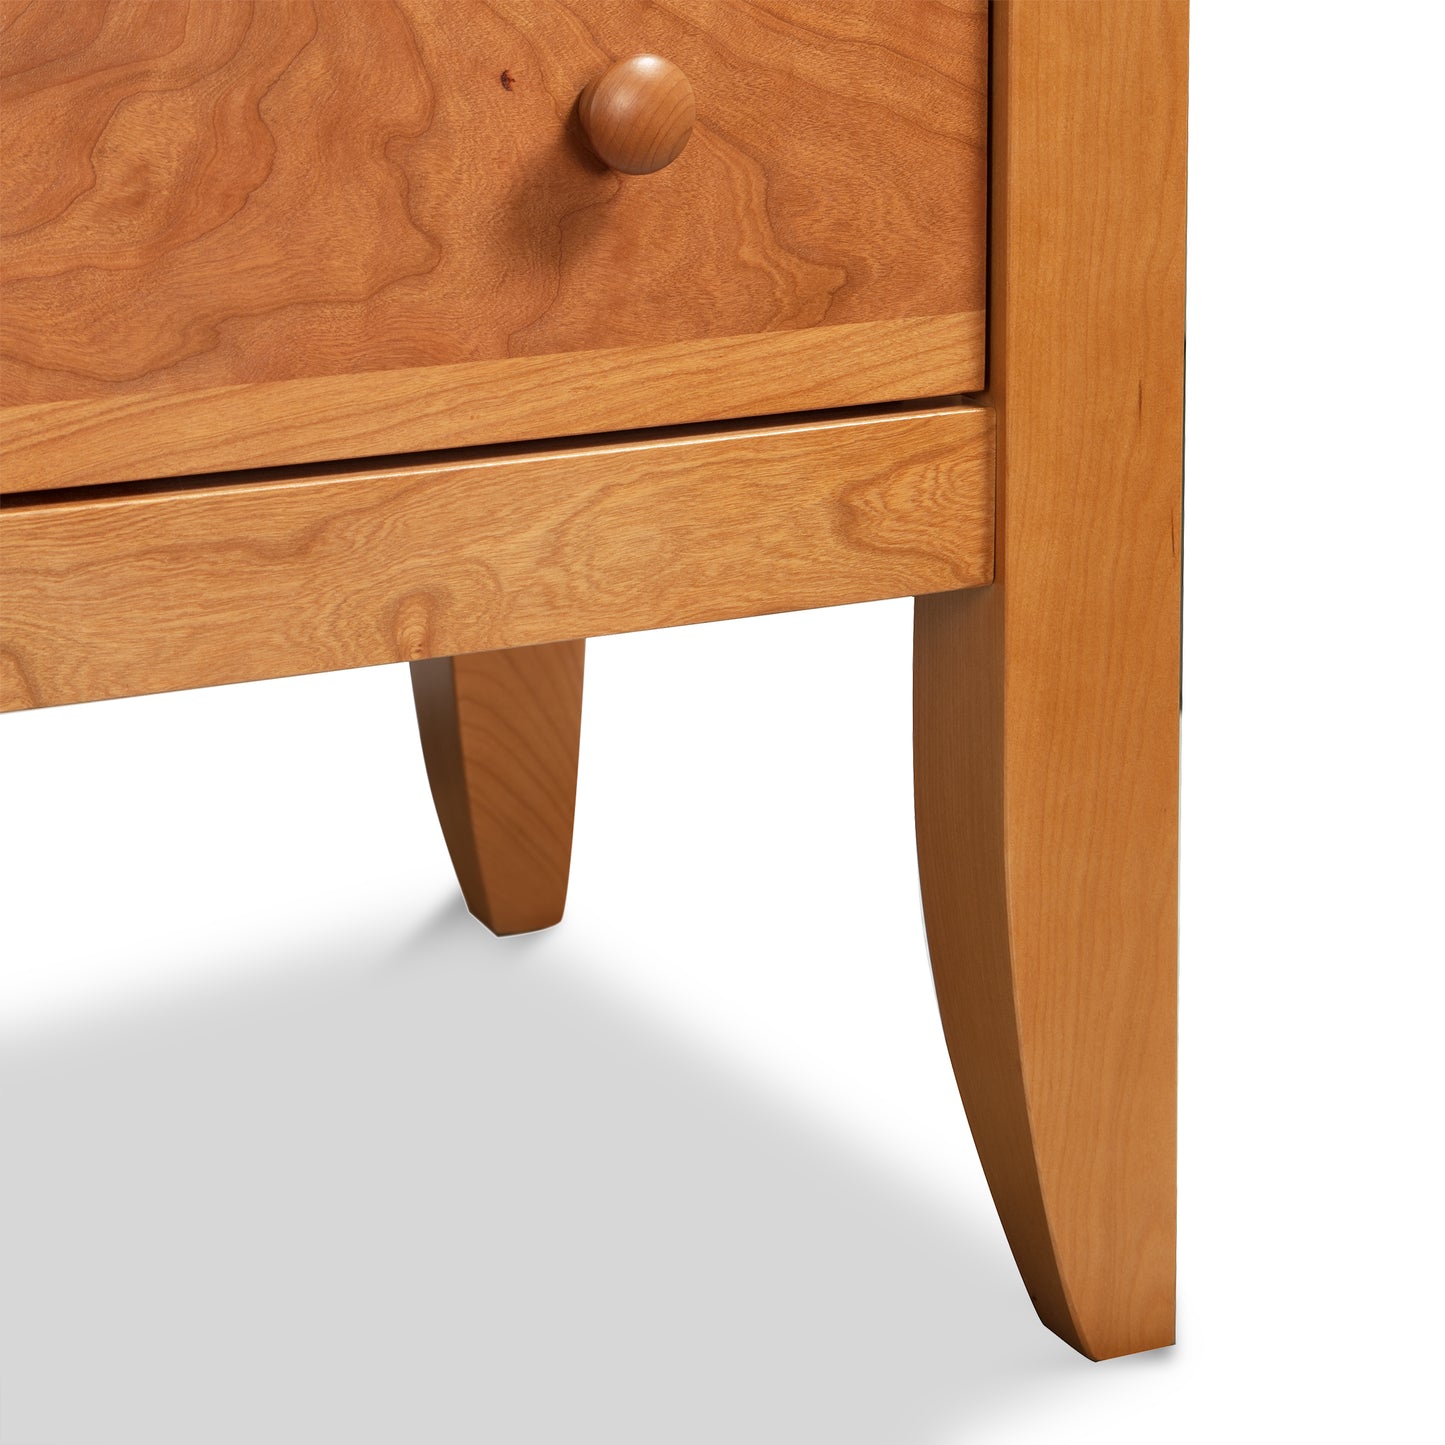 A close up of a wooden nightstand with drawers.